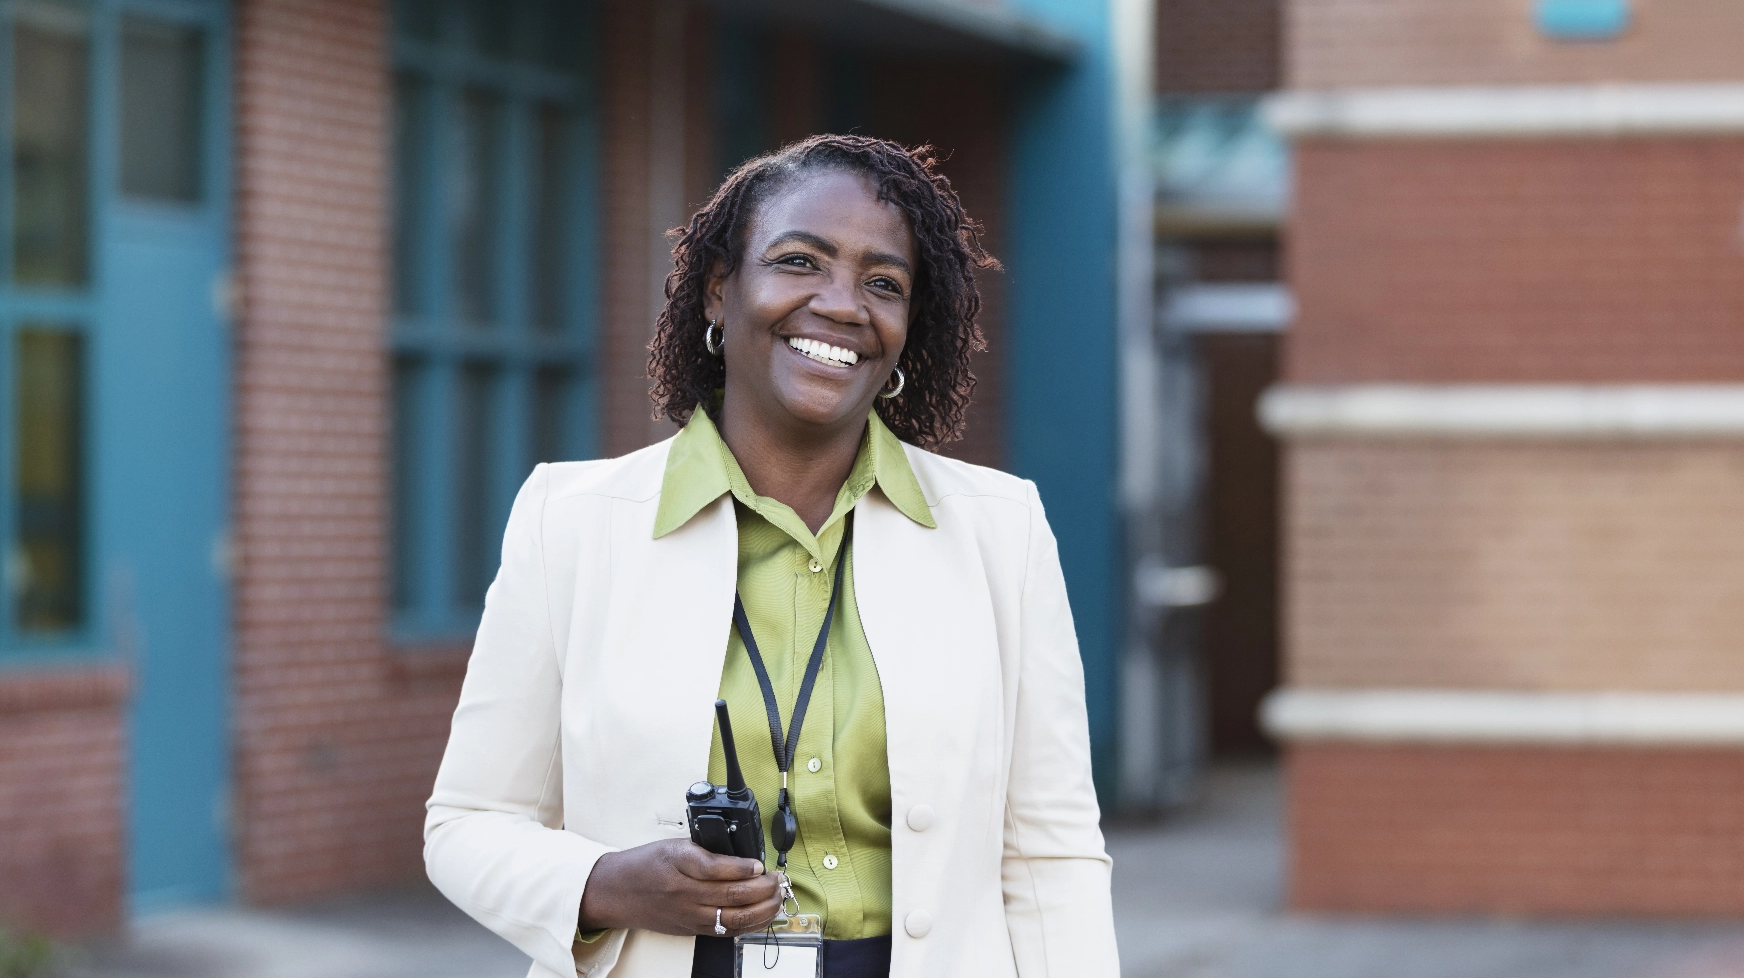 An administrator holding a walkie talkie smiles outside a building